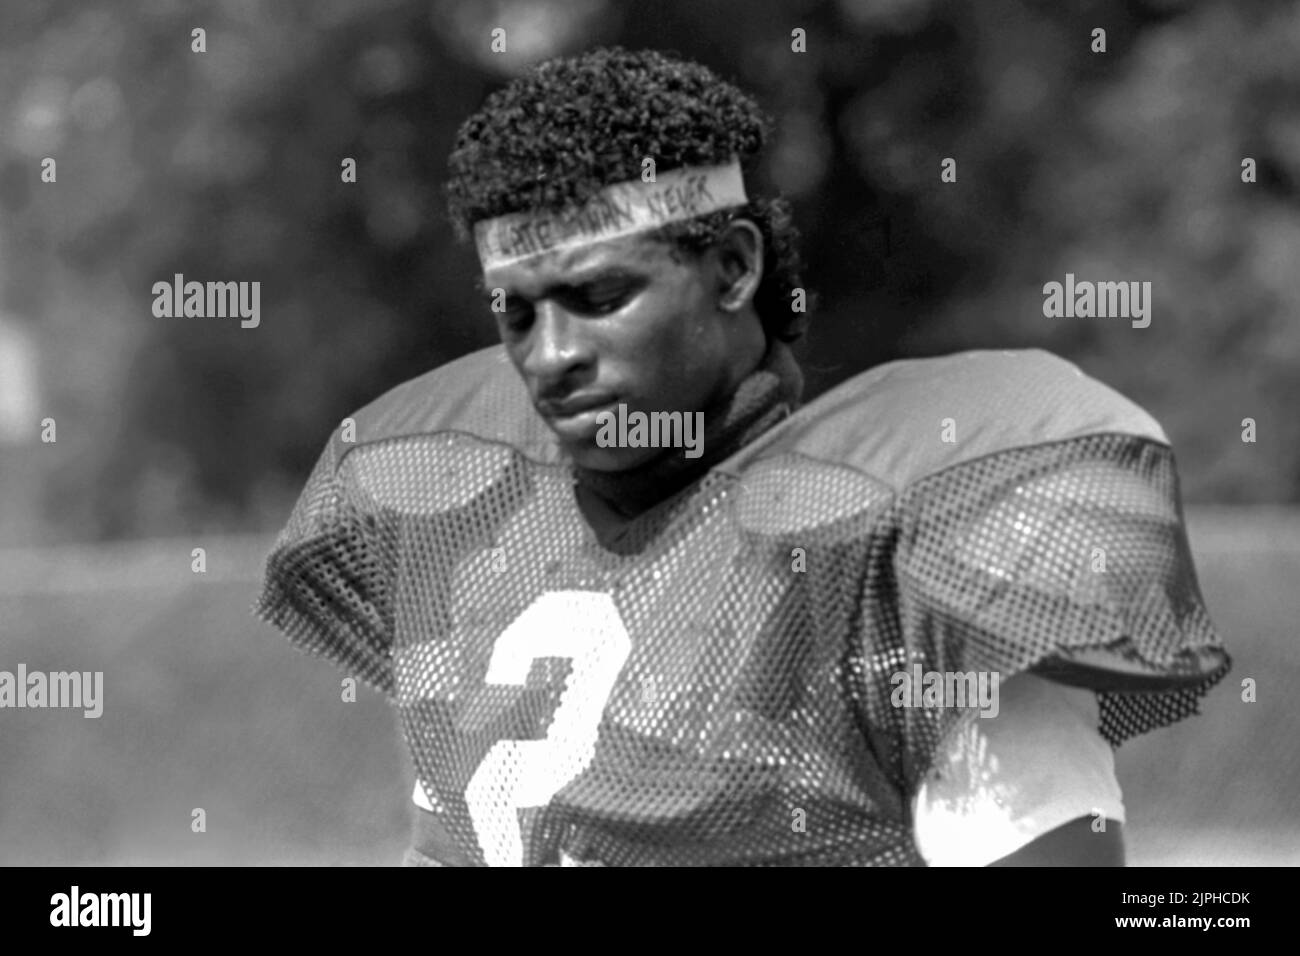 Deion Sanders at Florida State University in Tallahassee, Florida, c1988, where he played under head coach Bobby Bowden. Sanders, sometimes referred to as 'Prime Time' or 'Neon Deion', would later be inducted into the College Football Hall of Fame and the Pro Football Hall of Fame. A multi-sport athlete, he played for multiple teams in the National Football League (NFL) and Major League Baseball (MLB). Stock Photo